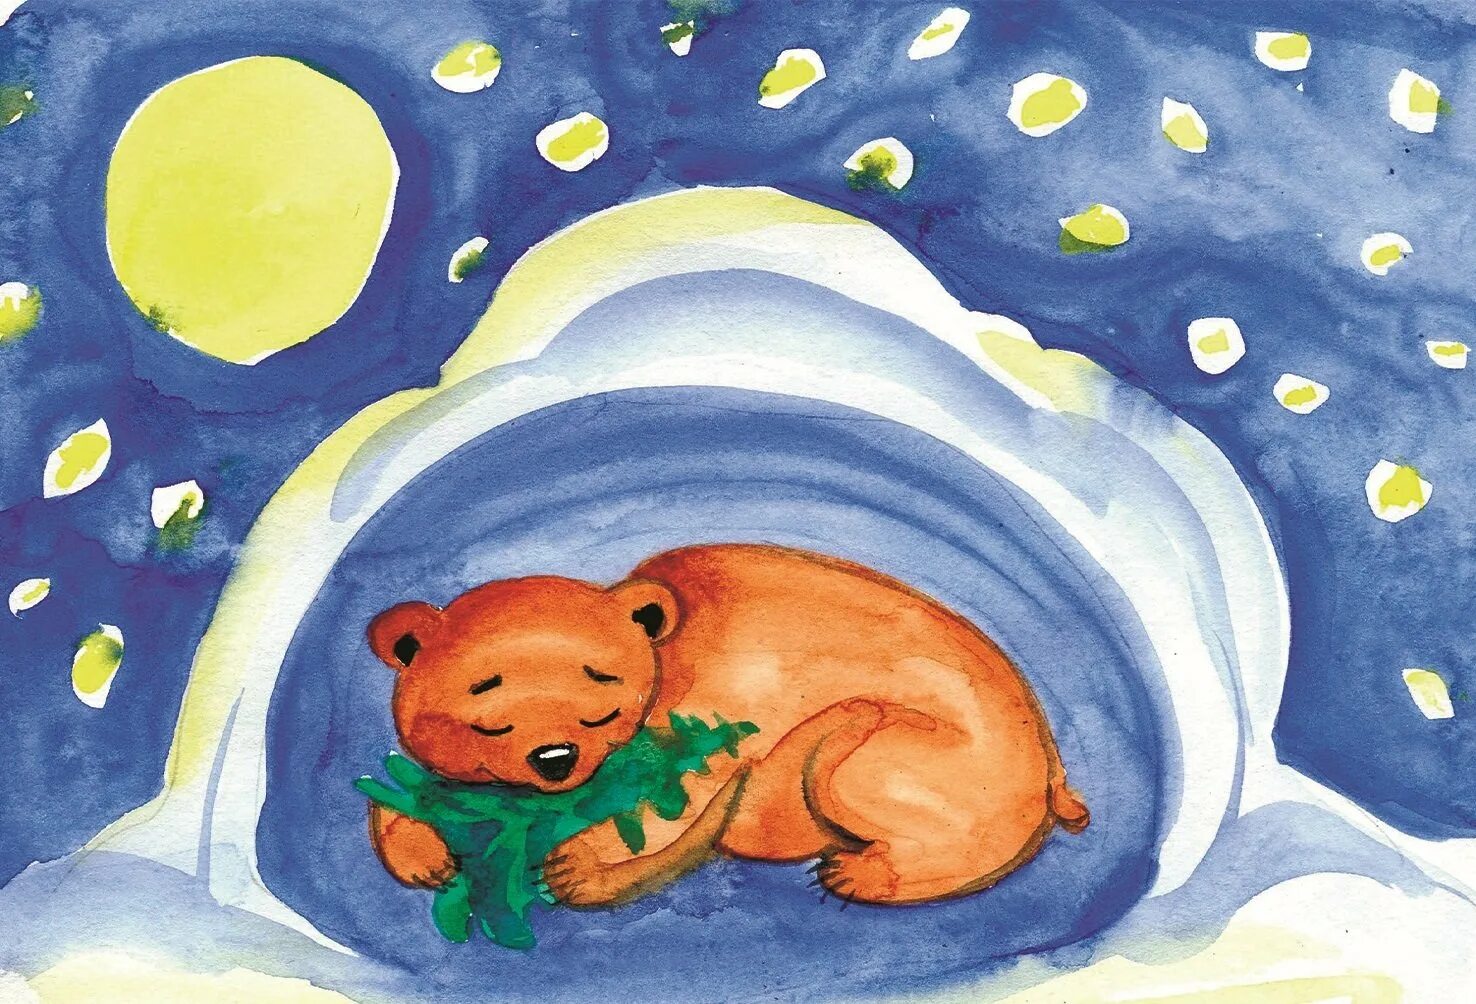 Violent coloring: why do bears sleep in winter?